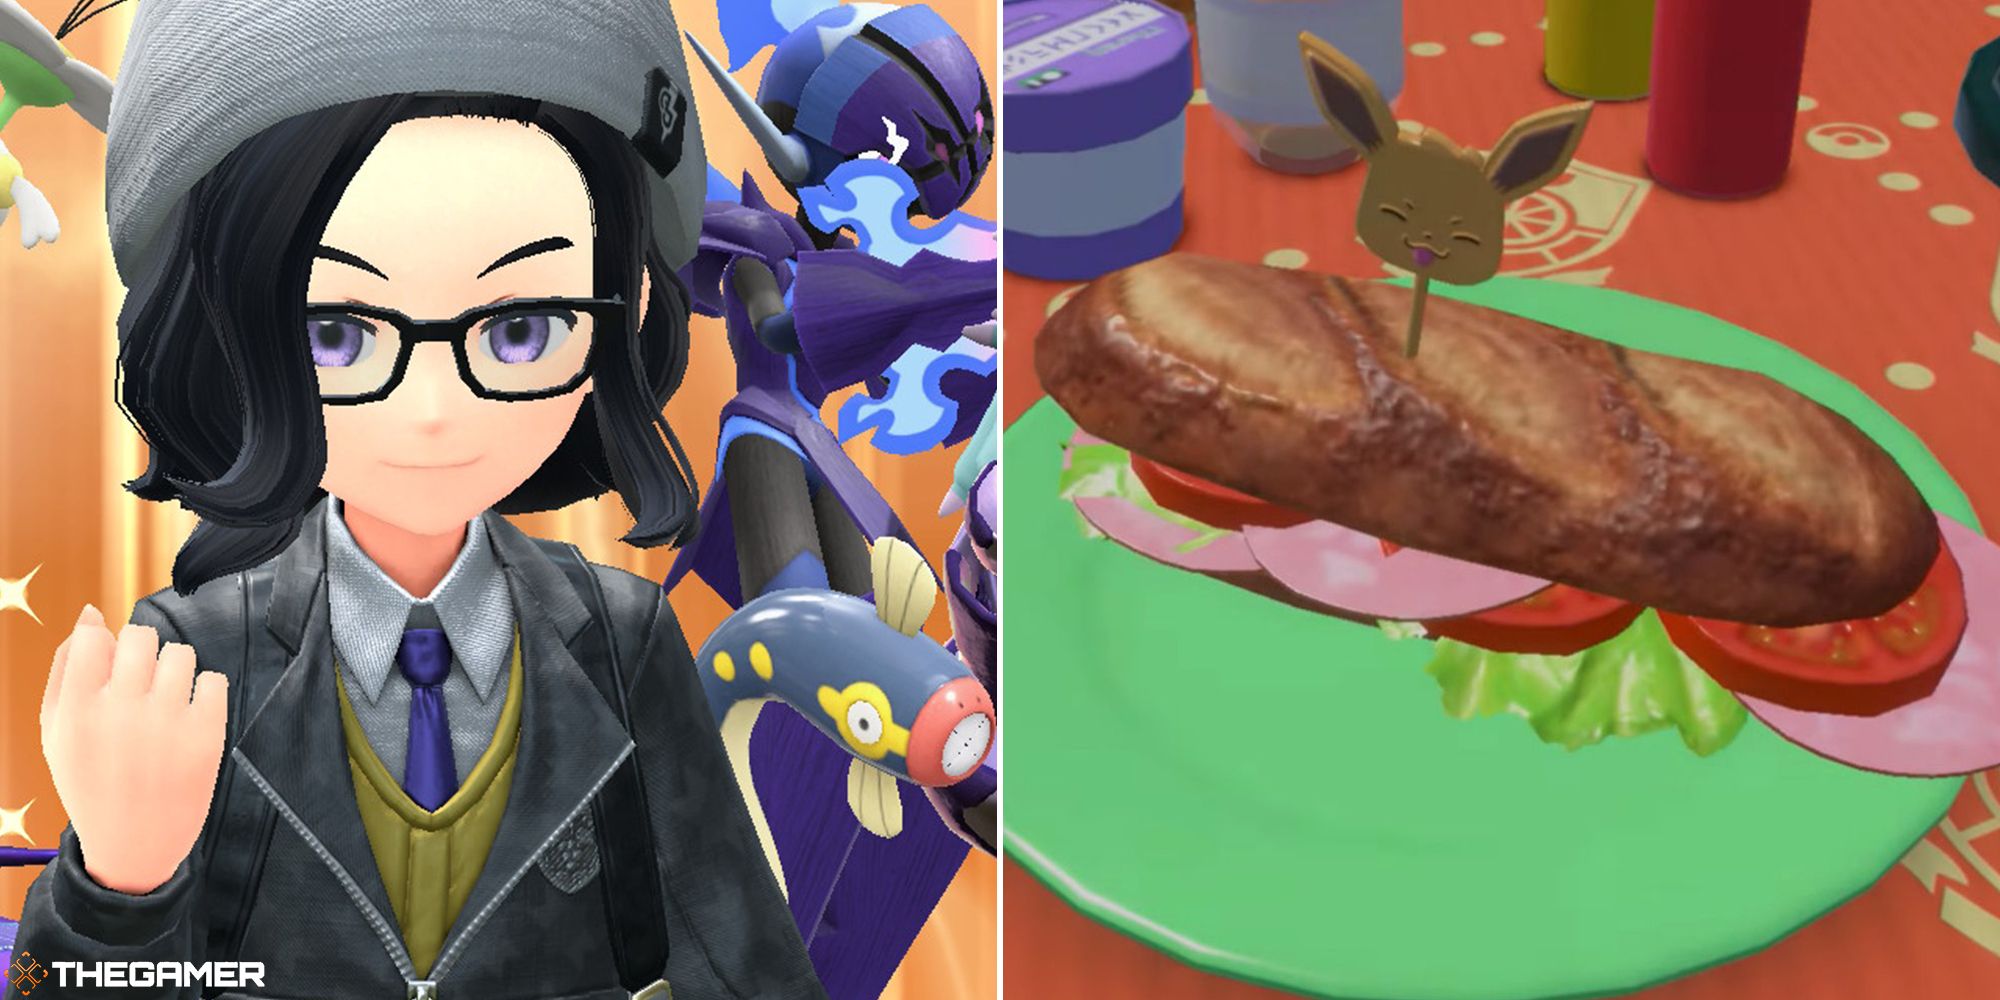 List of Sandwich Ingredients and Effects  Pokemon Scarlet and Violet  (SV)｜Game8